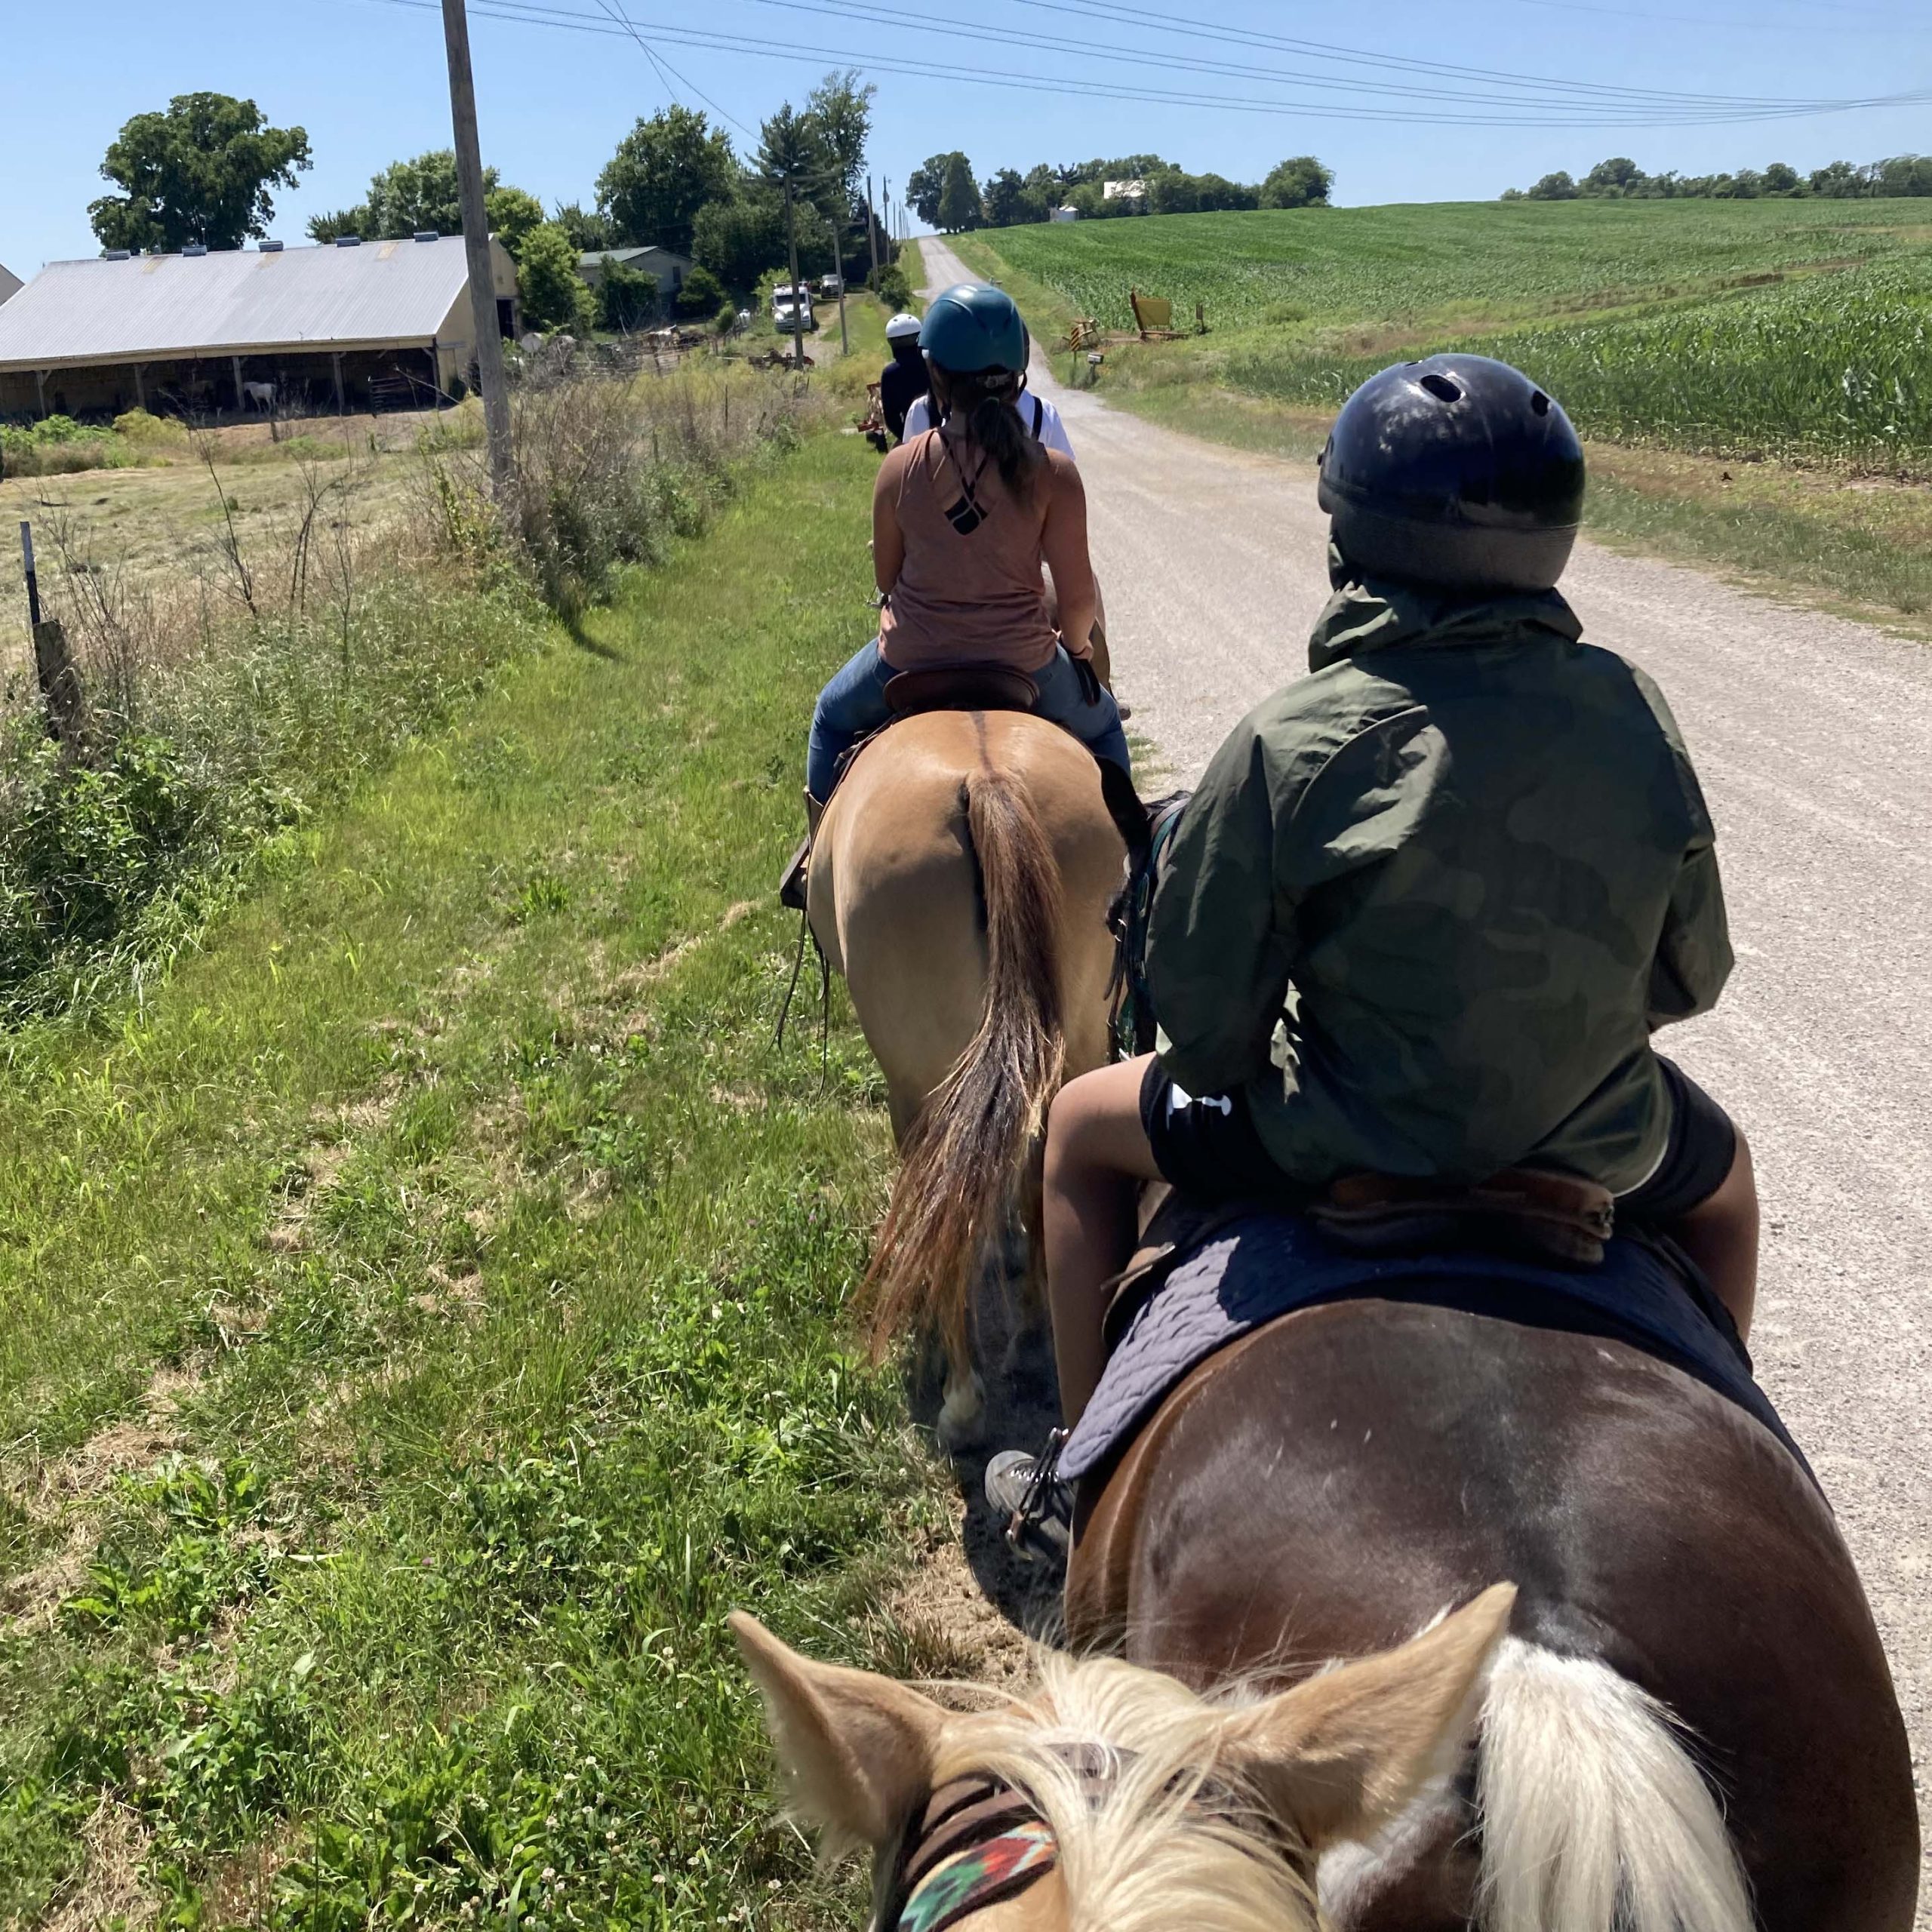 St. Louis scholars experiencing and learning how to ride horses on a trail ride excursion